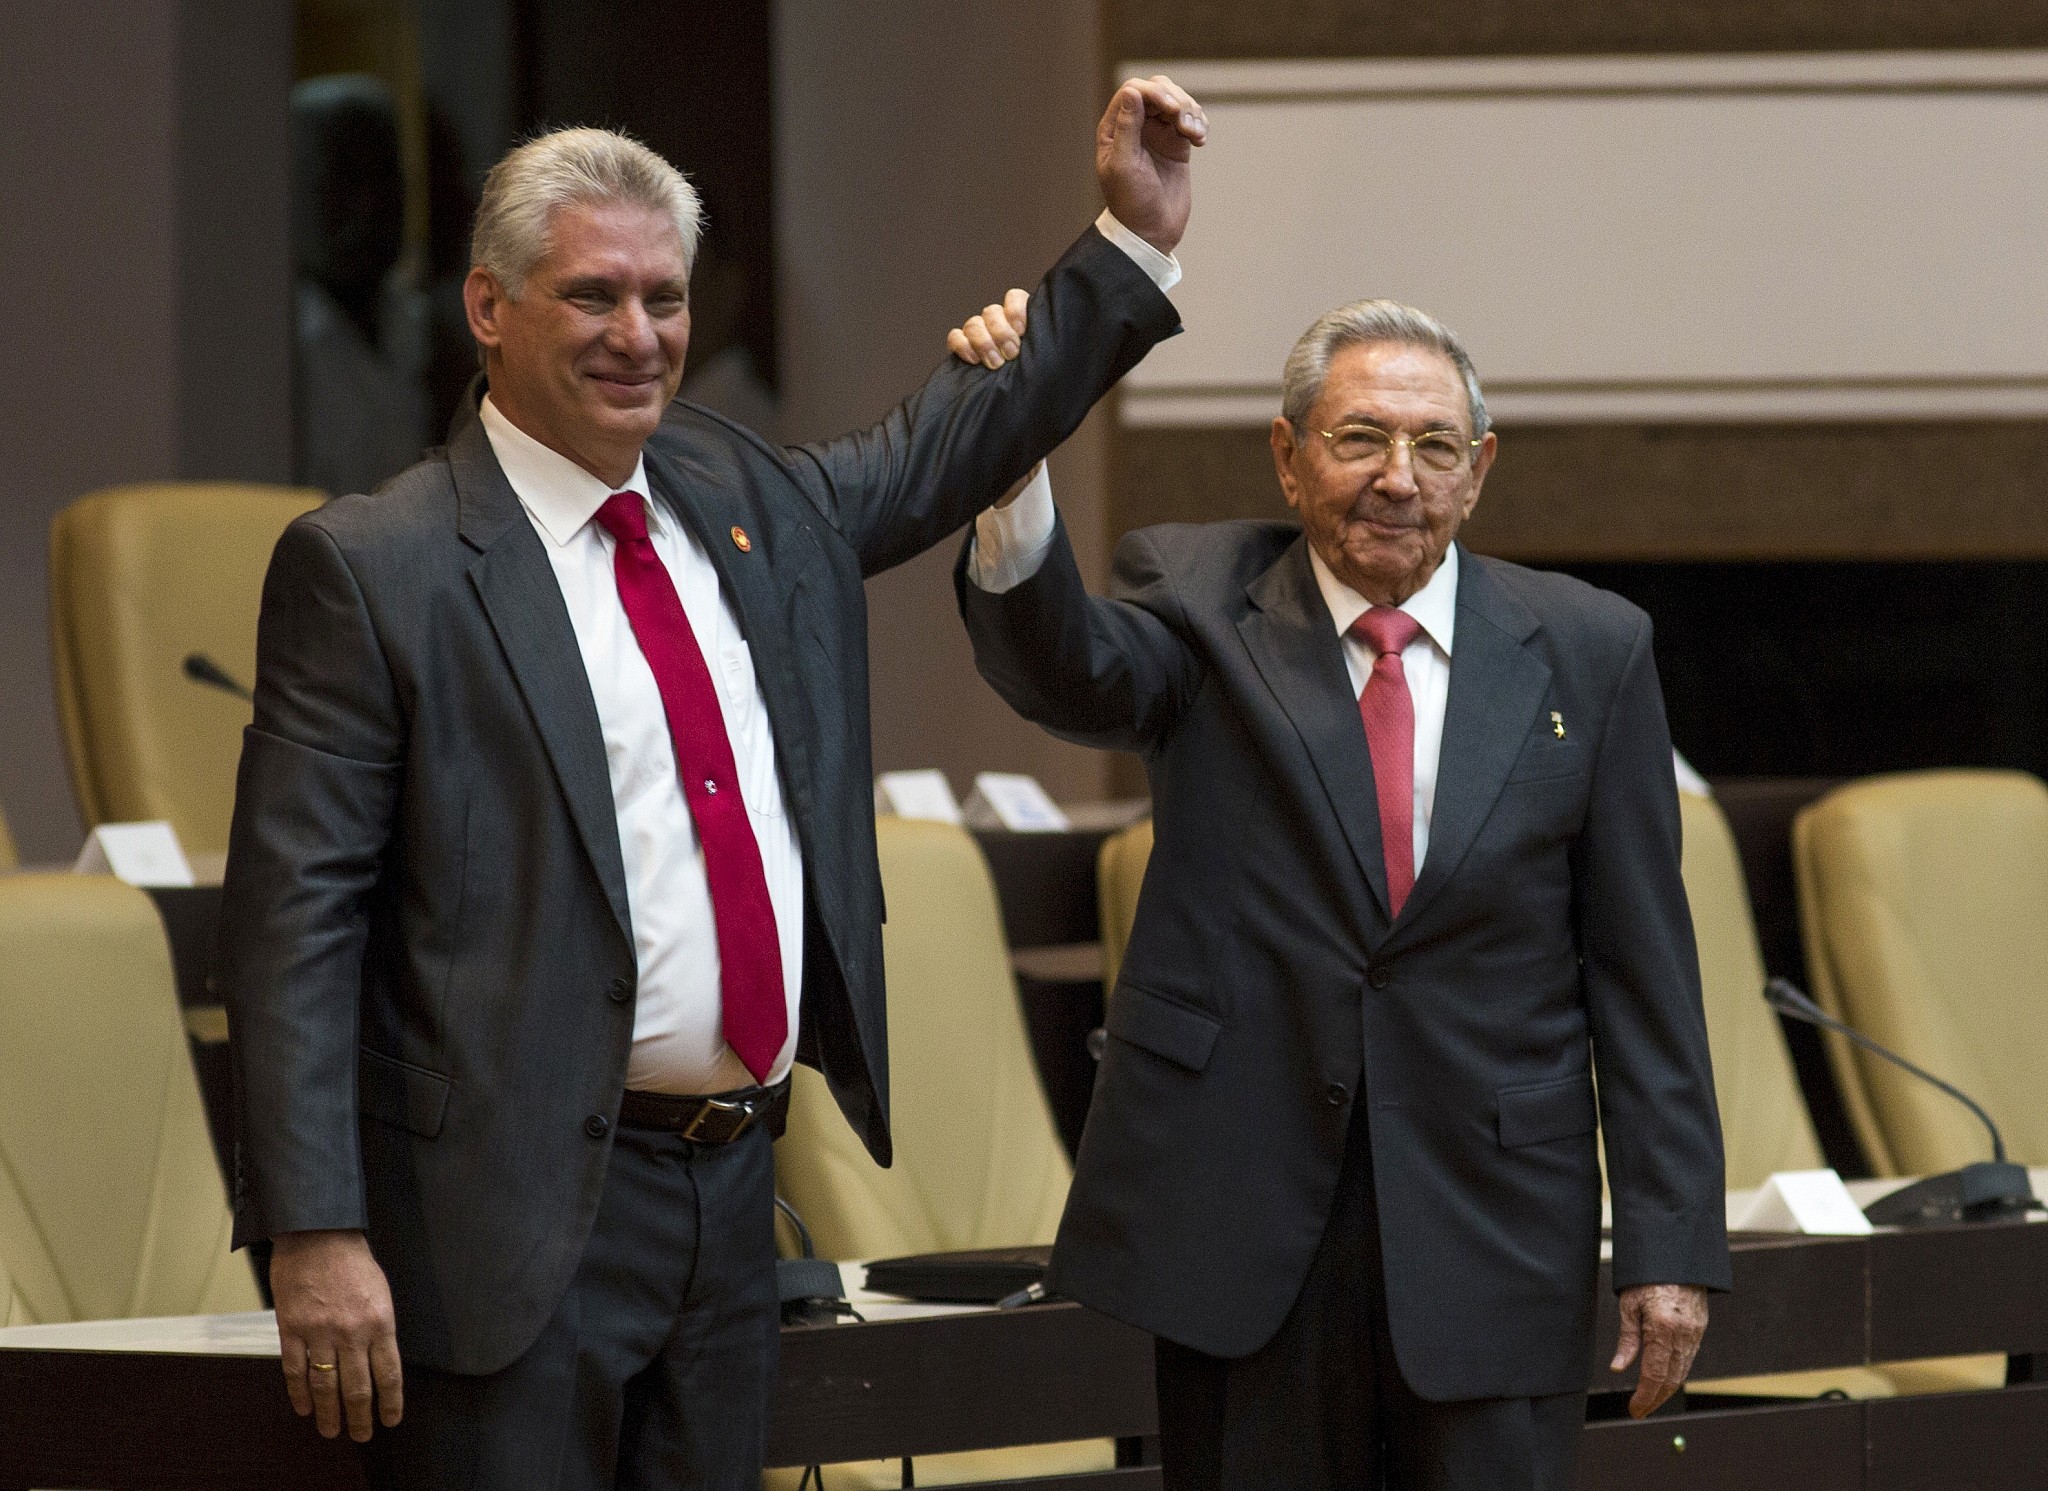 Diaz-Canel replaces Raul Castro as Cuba's president, marking end of an era | The Times of Israel